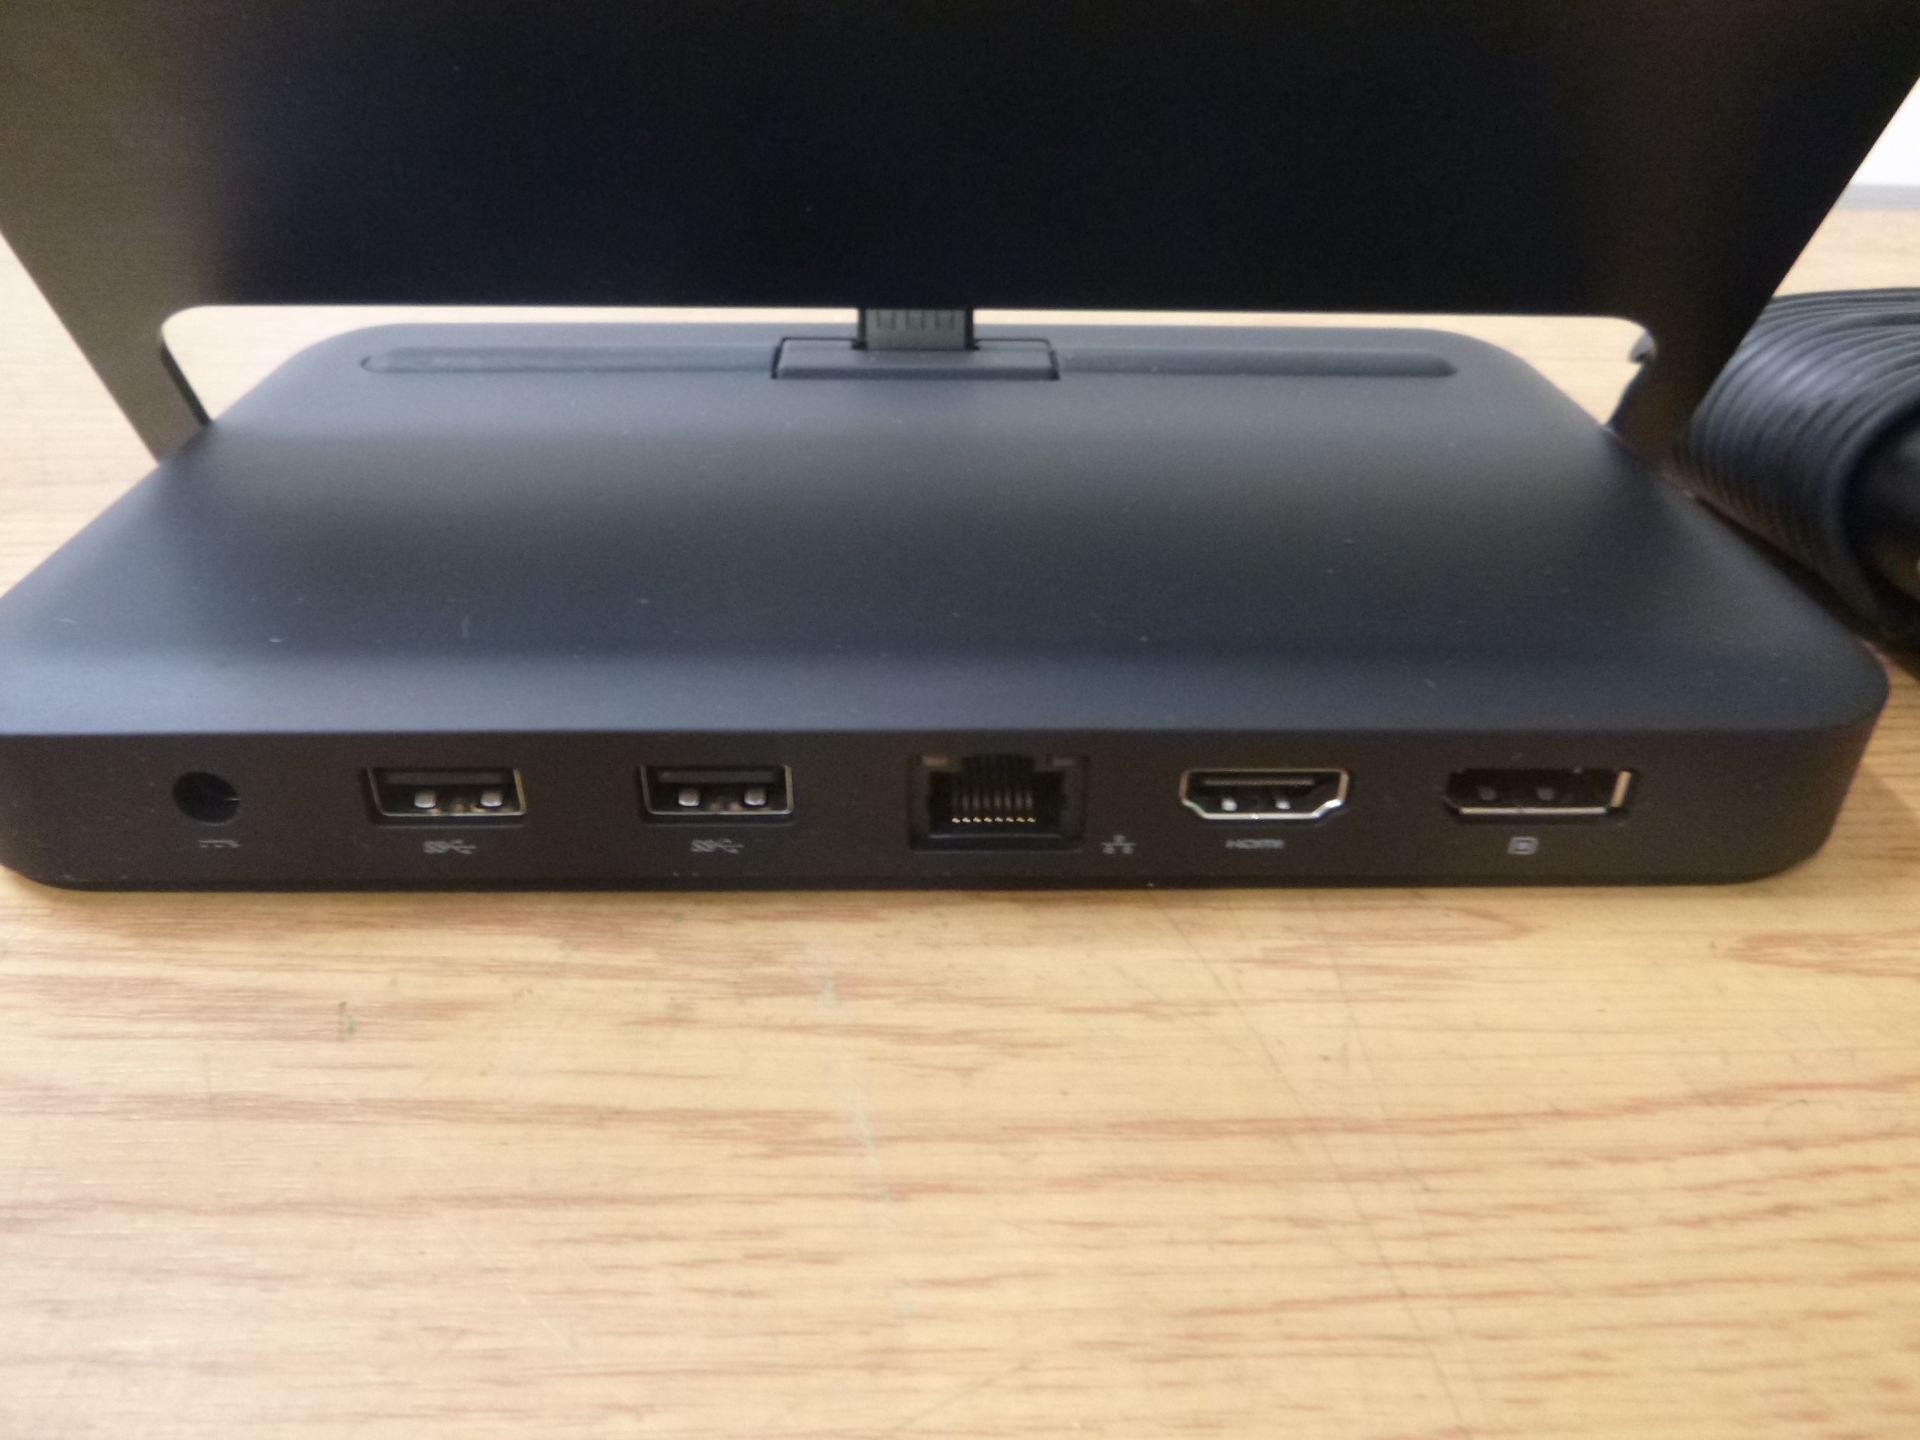 Dell Venue 11 Pro Tablet Docking Station 5130 / 7130 / 7139 / 7140 / 7350. WITH PSU. - Image 2 of 2